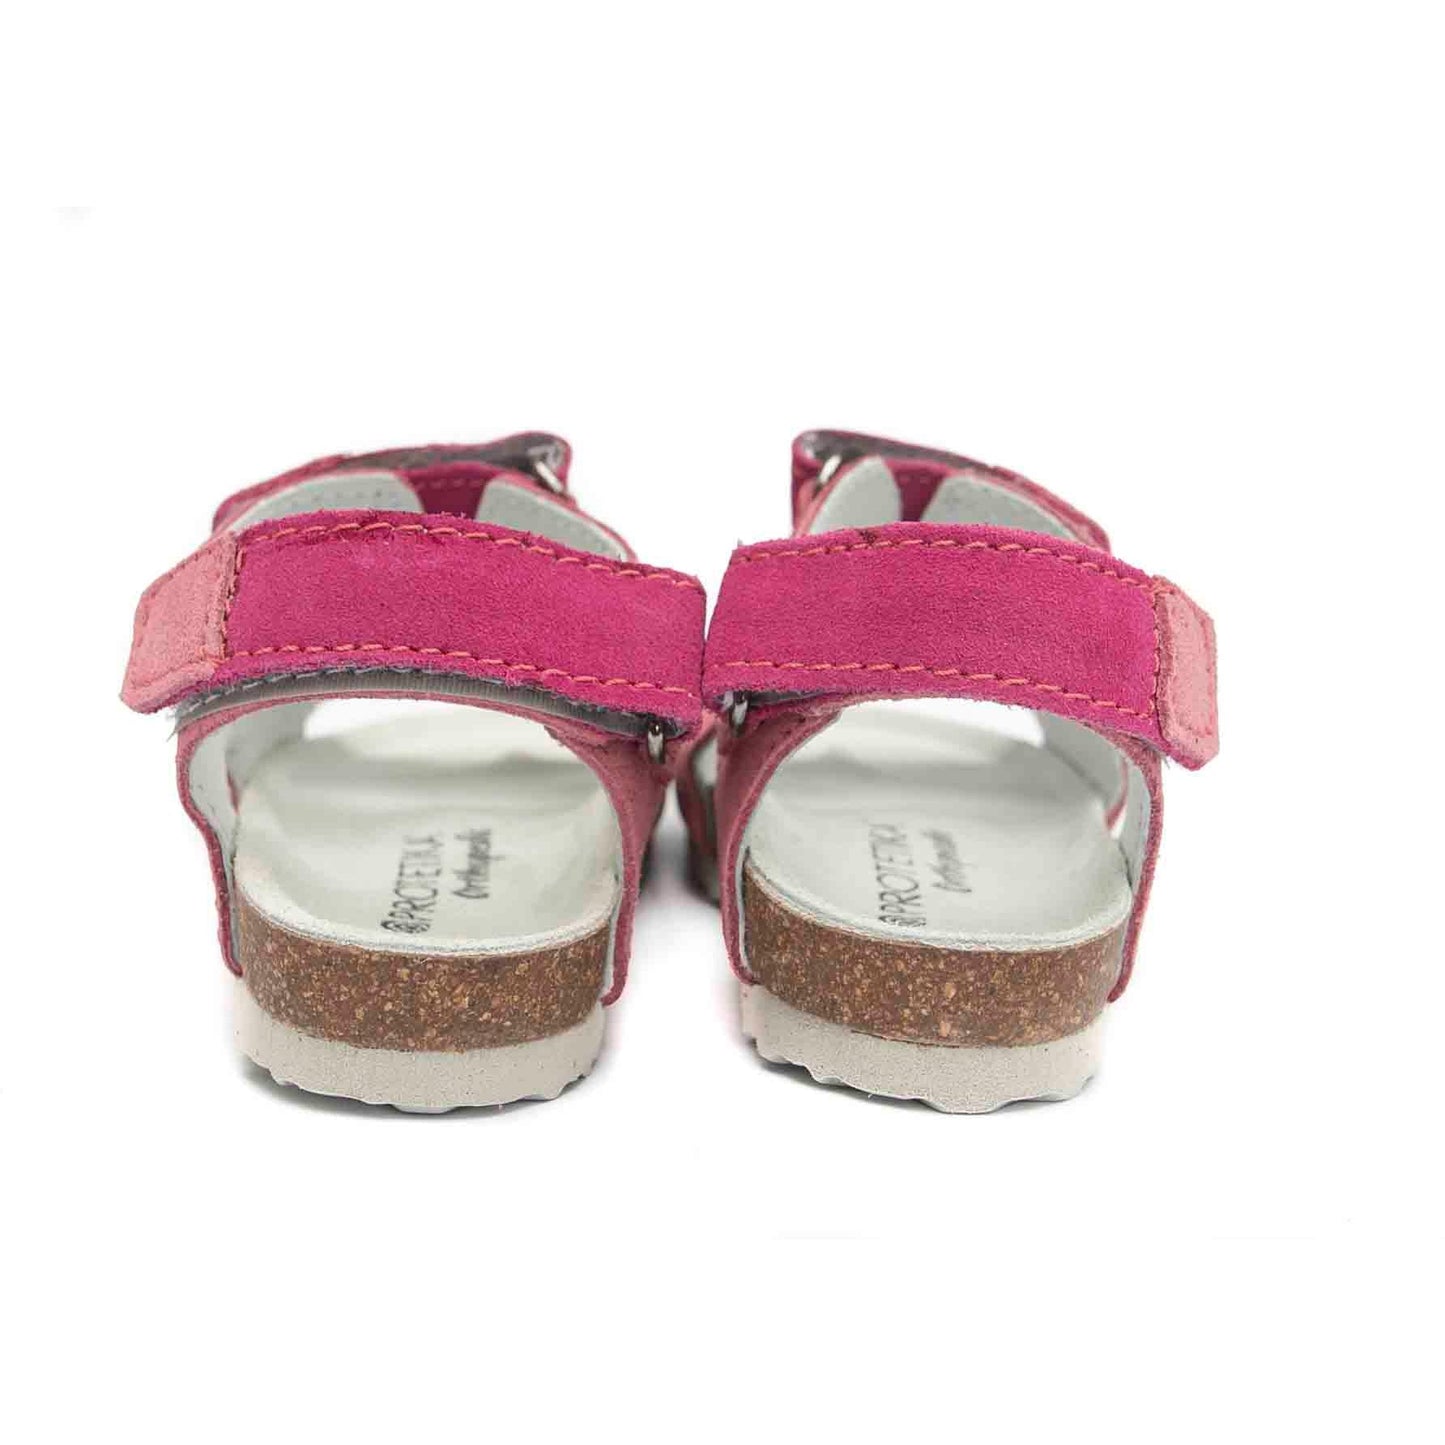 orthopedic older girls sandals  with open heel: T27: color pink - feelgoodshoes.ae